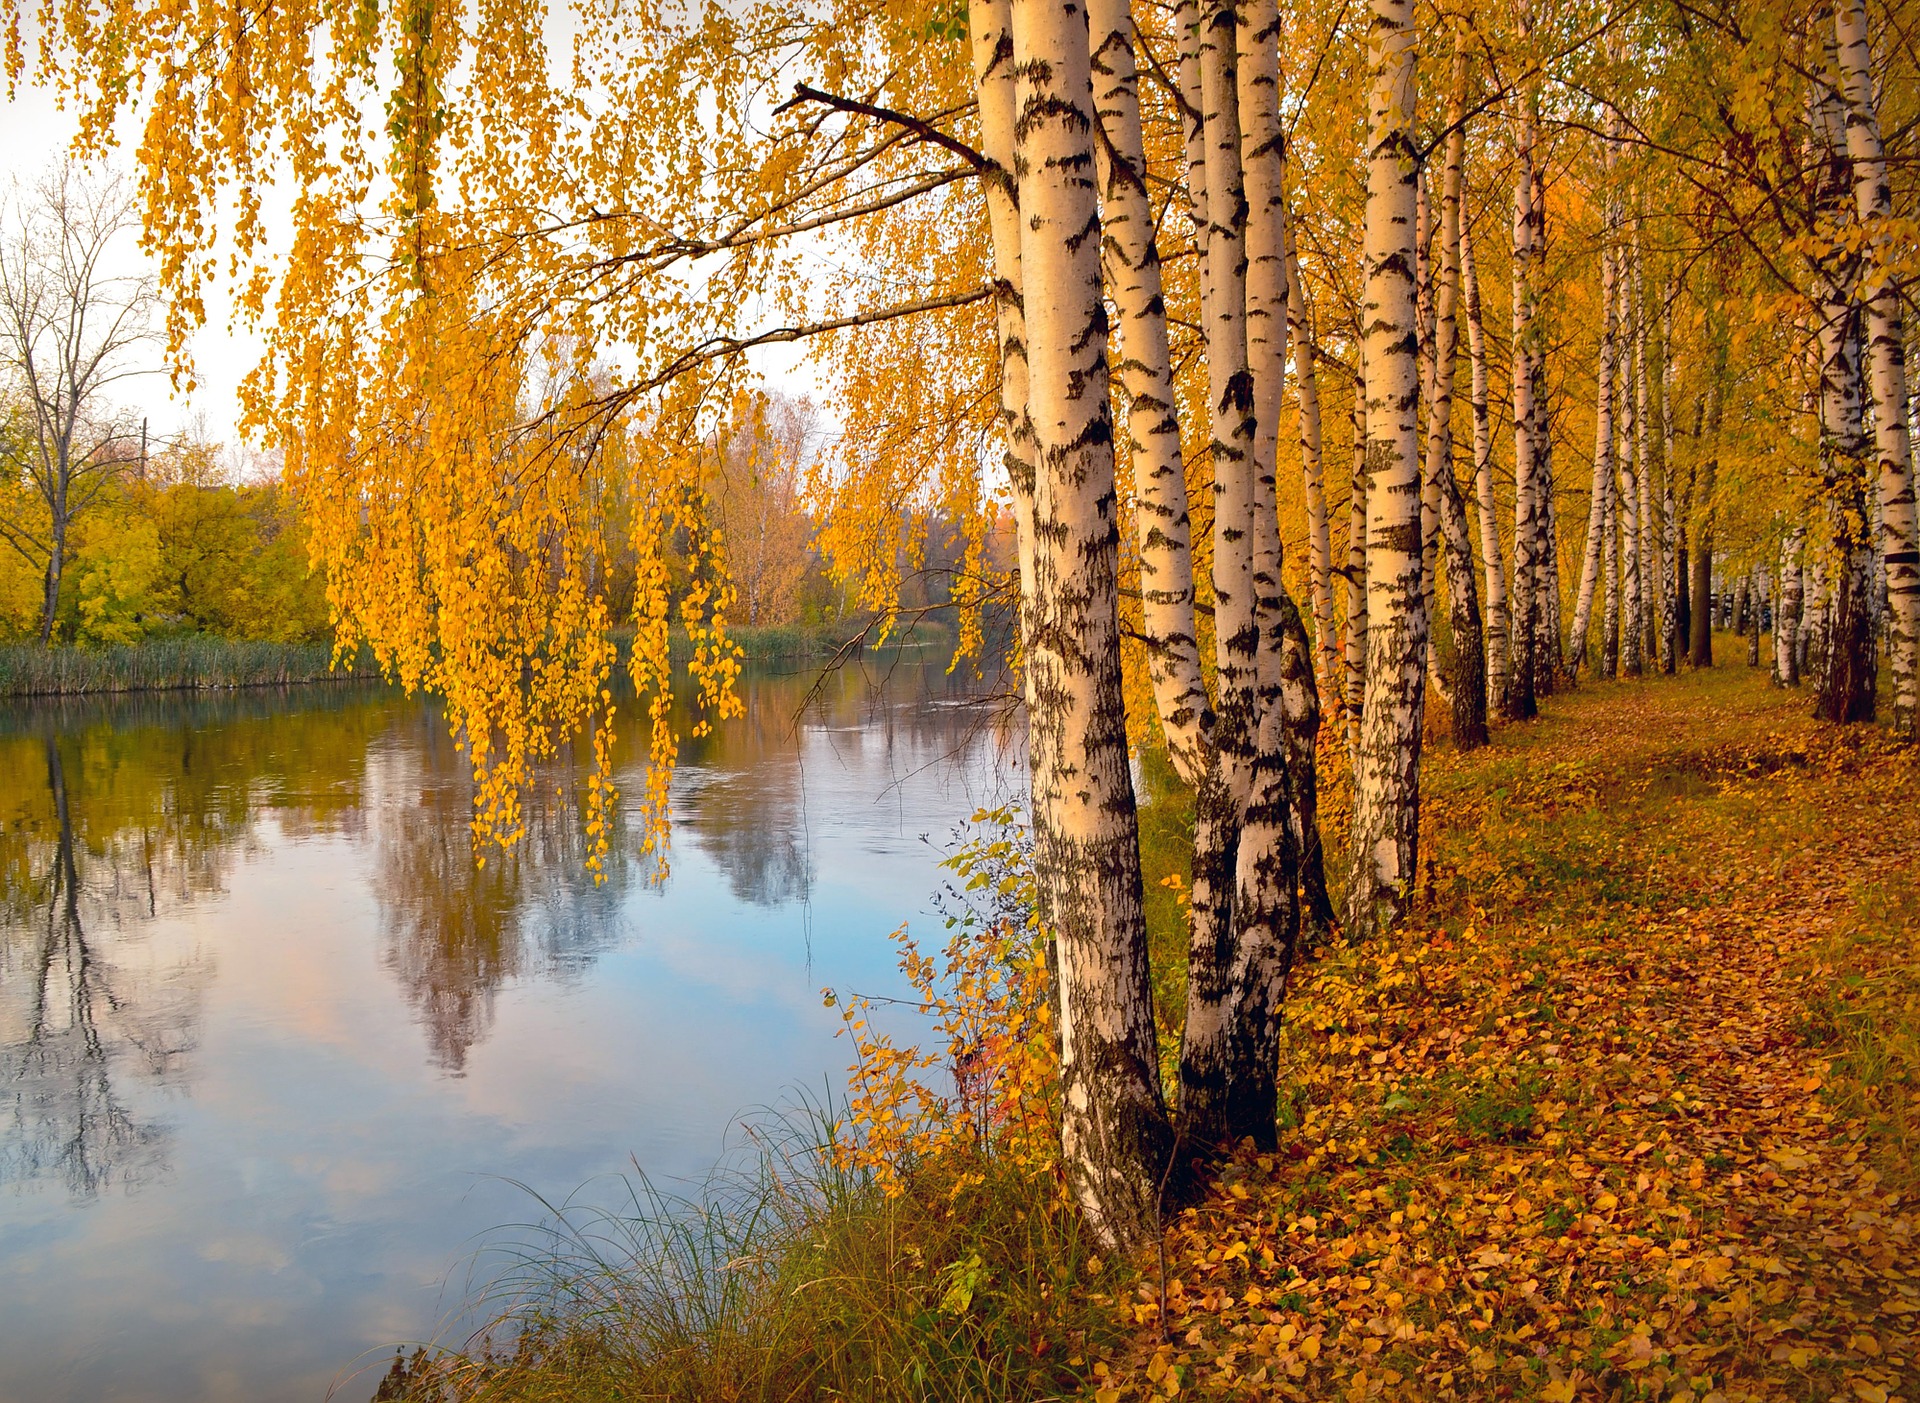 White birch trees stand on the bank of a river and it is autumn